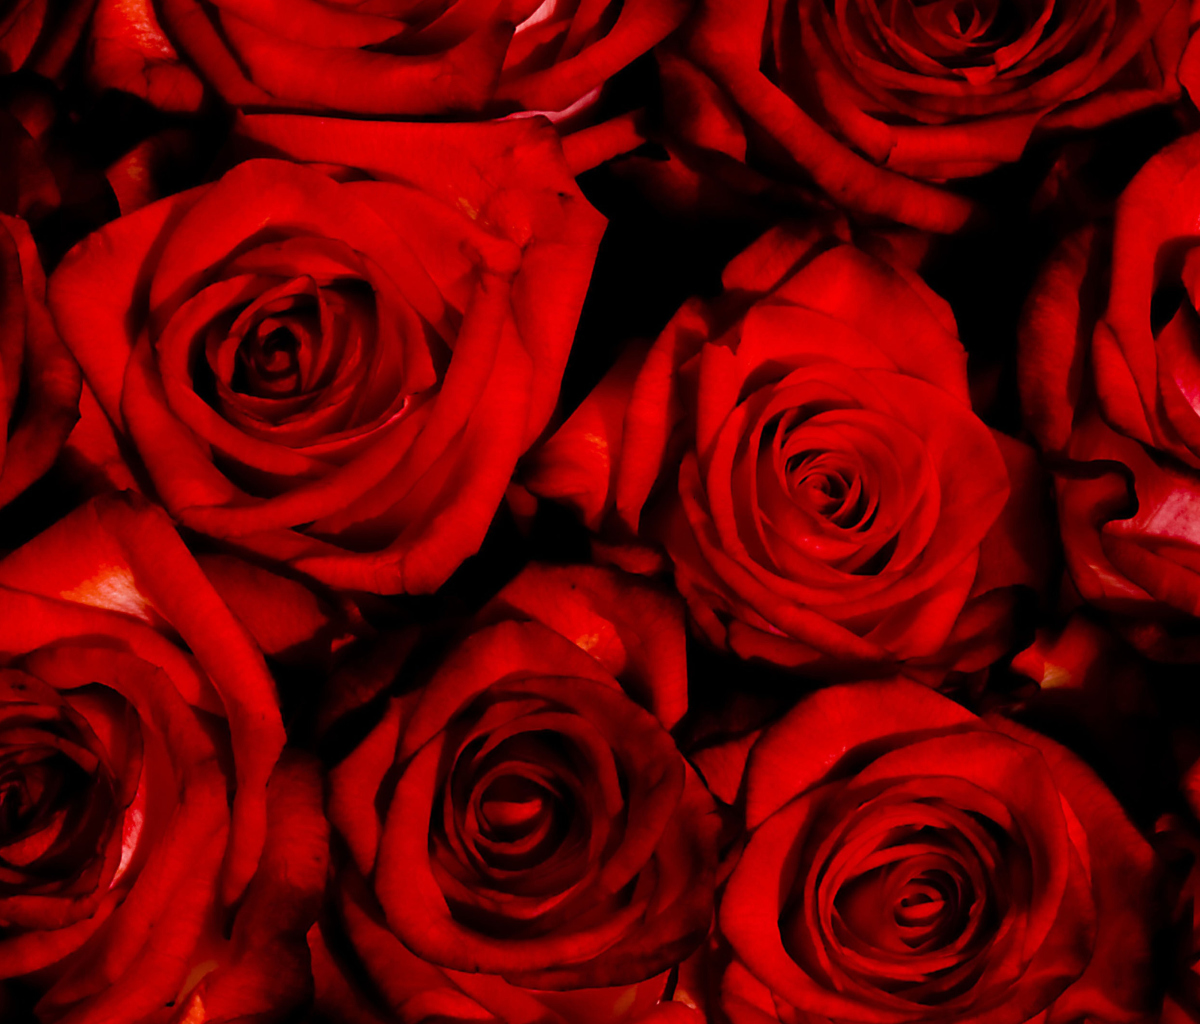 Red Flowers Of Love wallpaper 1200x1024